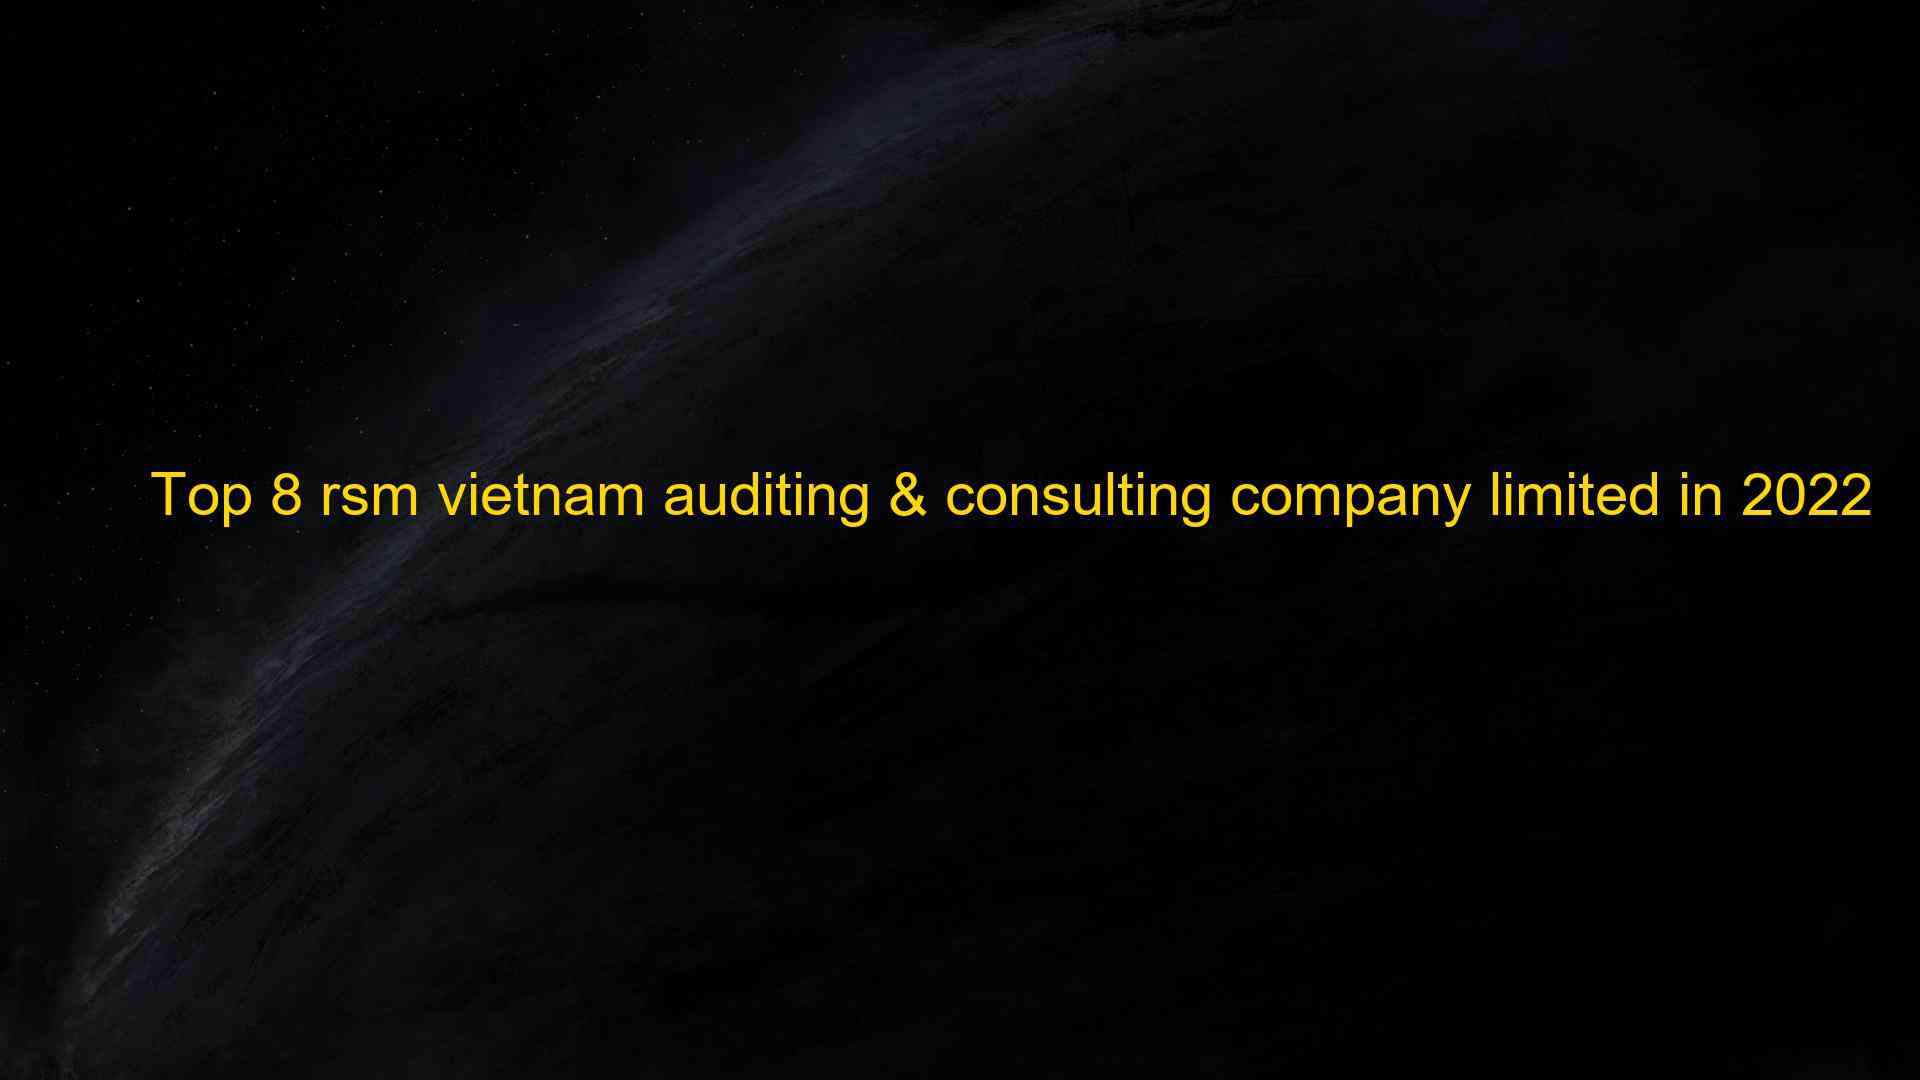 Top 8 rsm vietnam auditing consulting company limited in 2022 1660018659